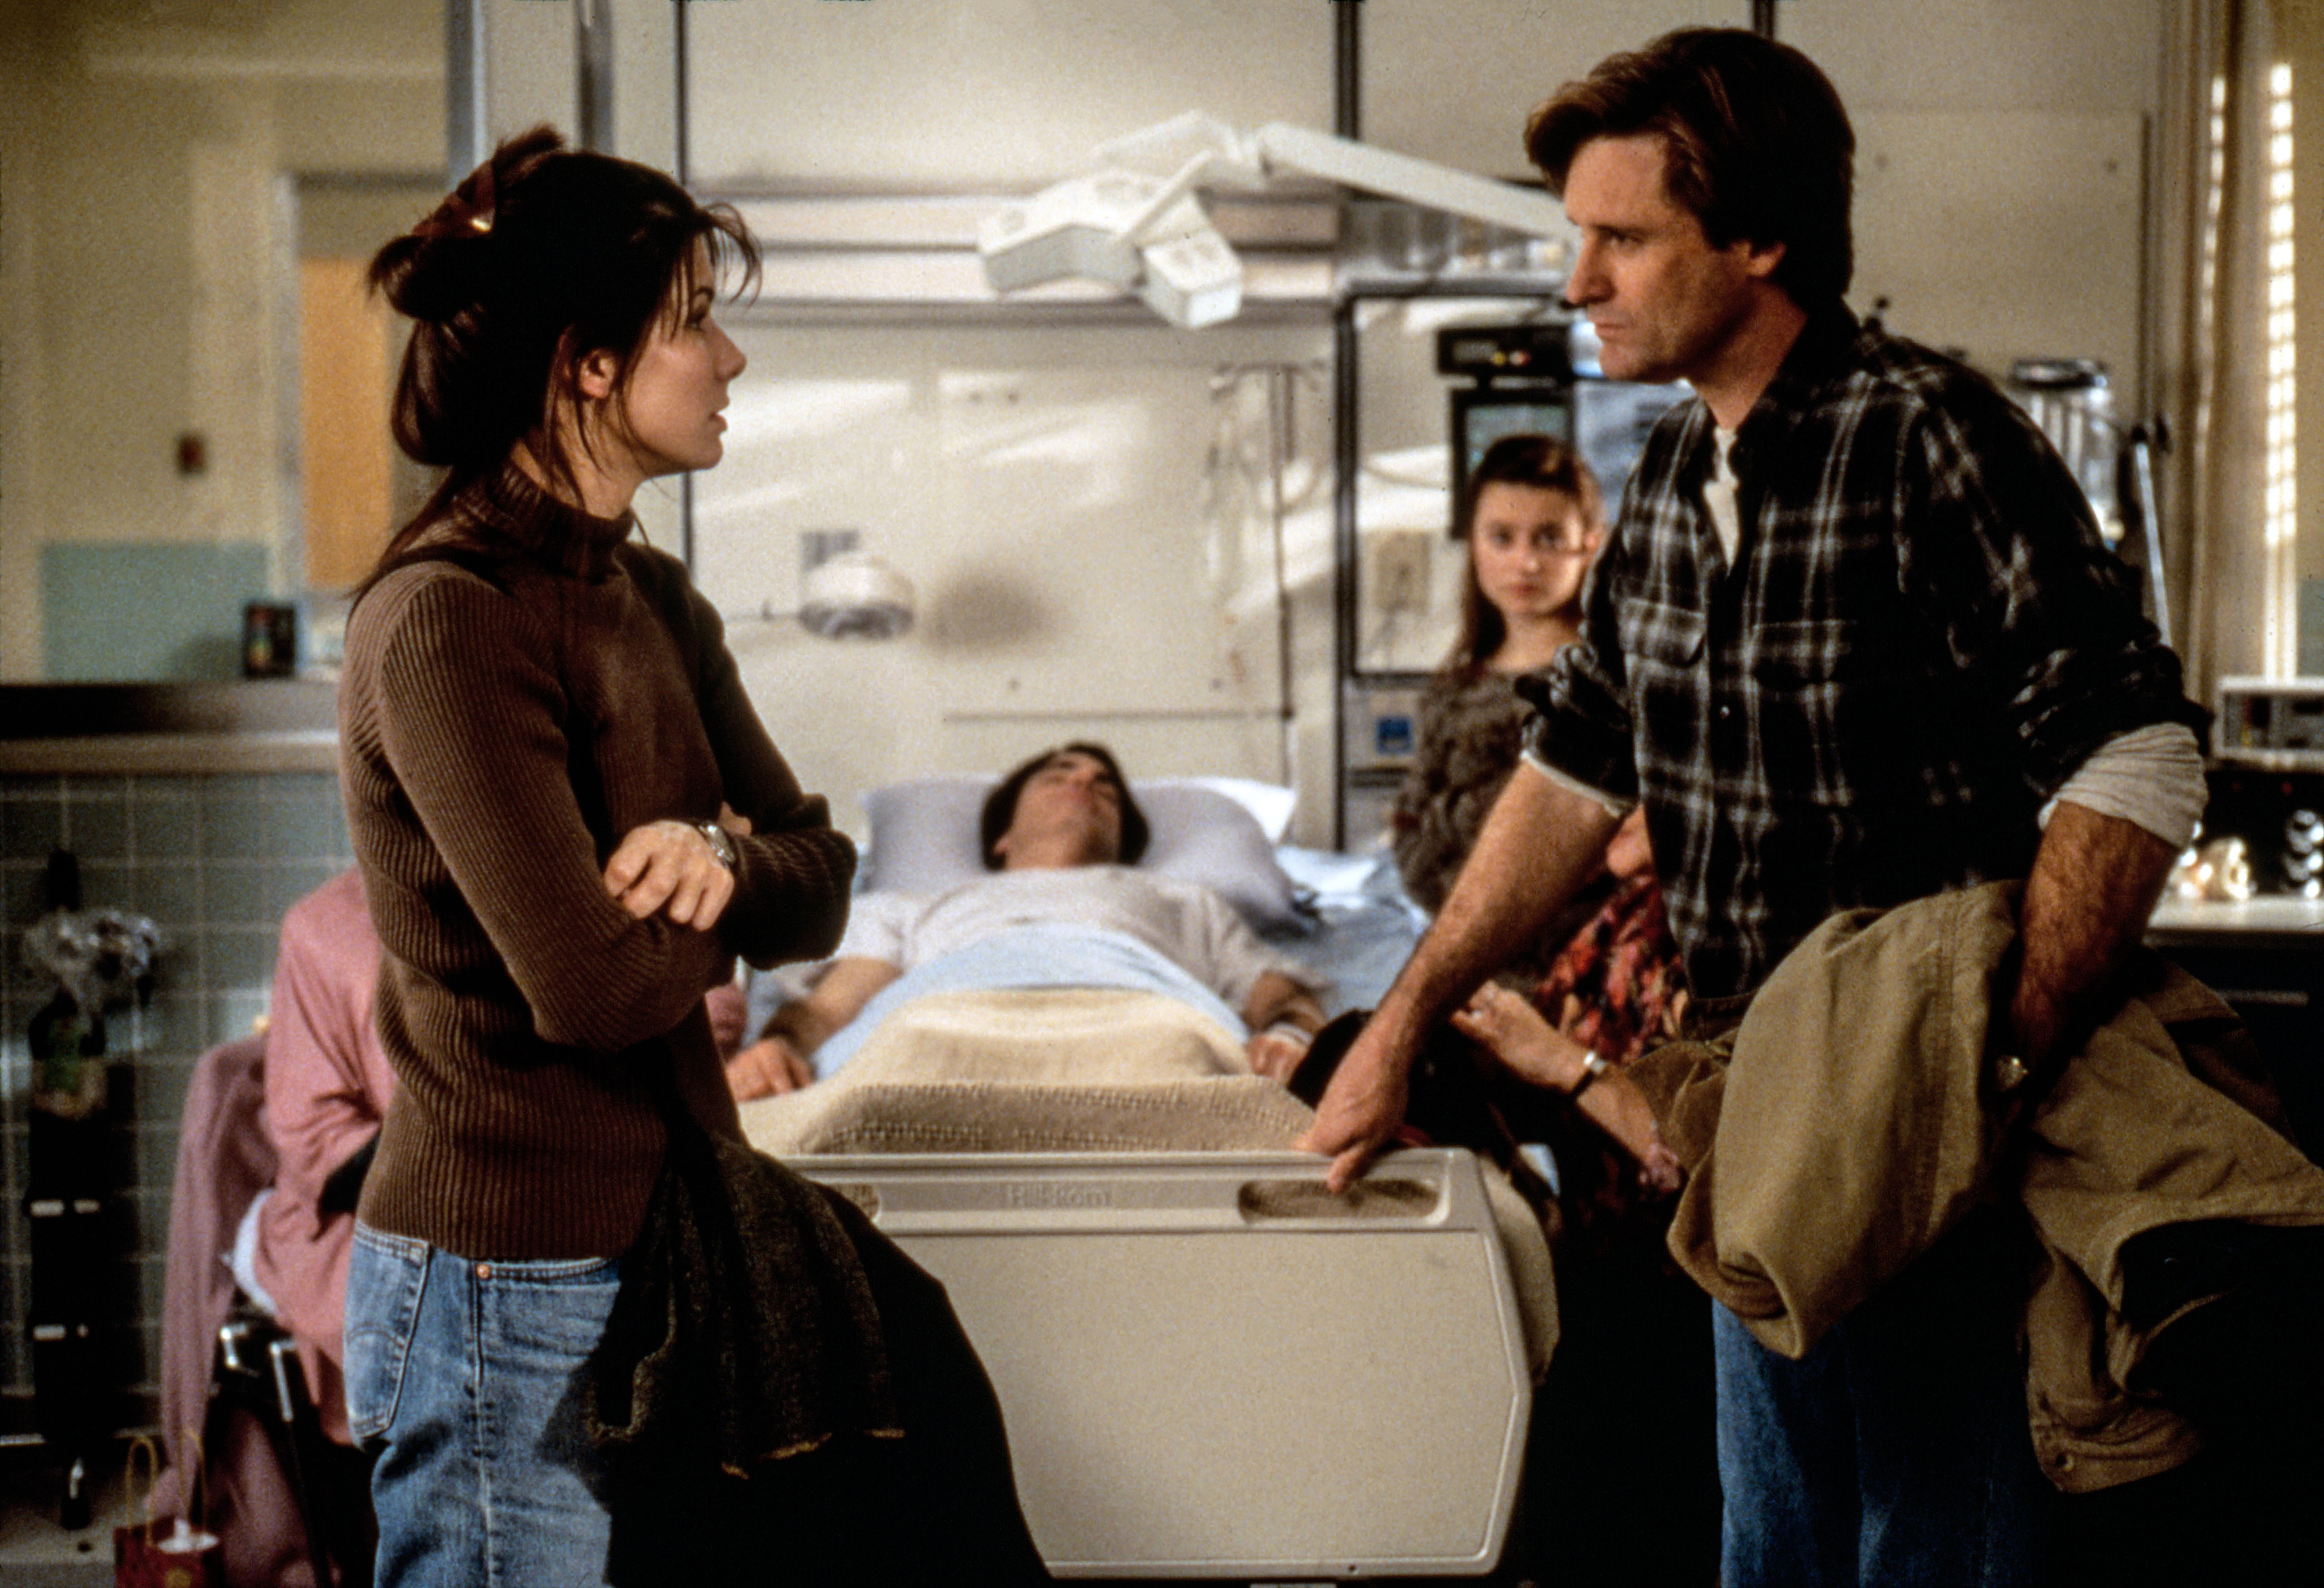 sandra bullock chatting with the family of a man in a coma in the hospital